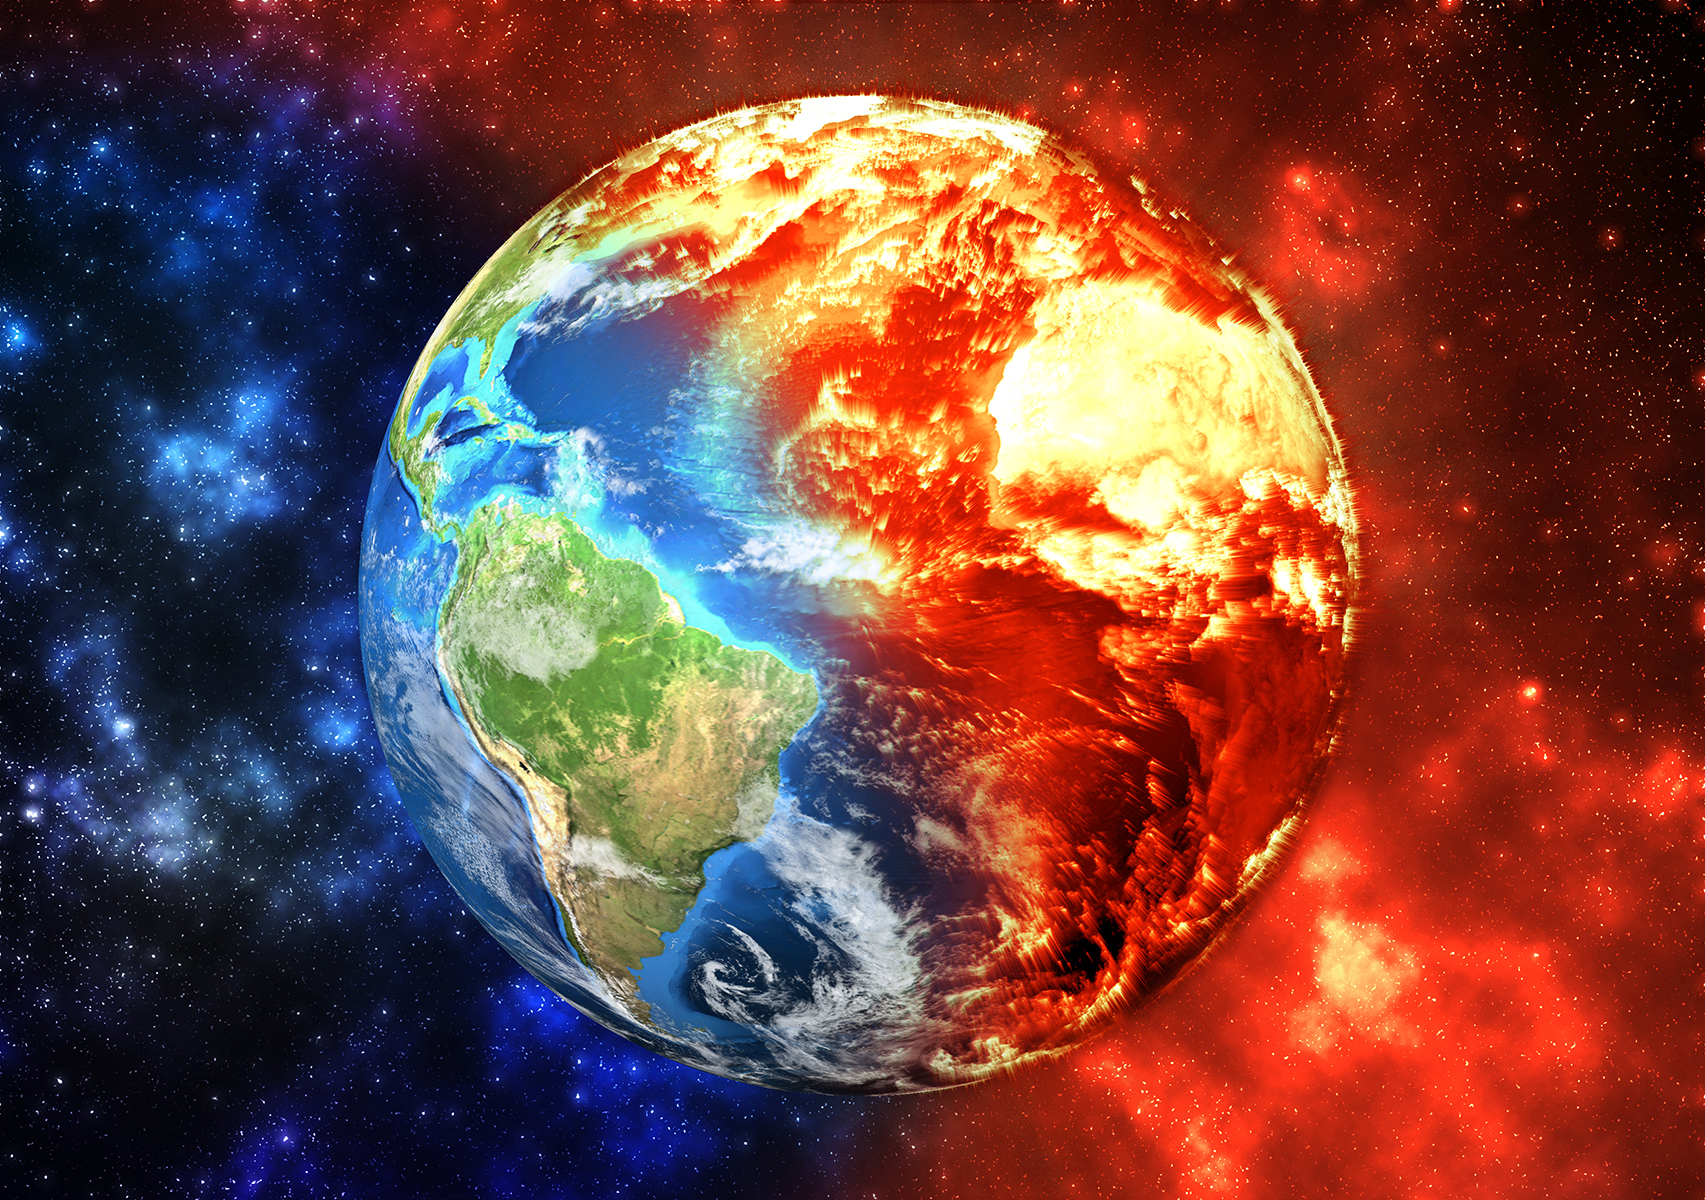 Cosmic illustration of Planet Earth, displaying the dramatic environmental effects of climate change